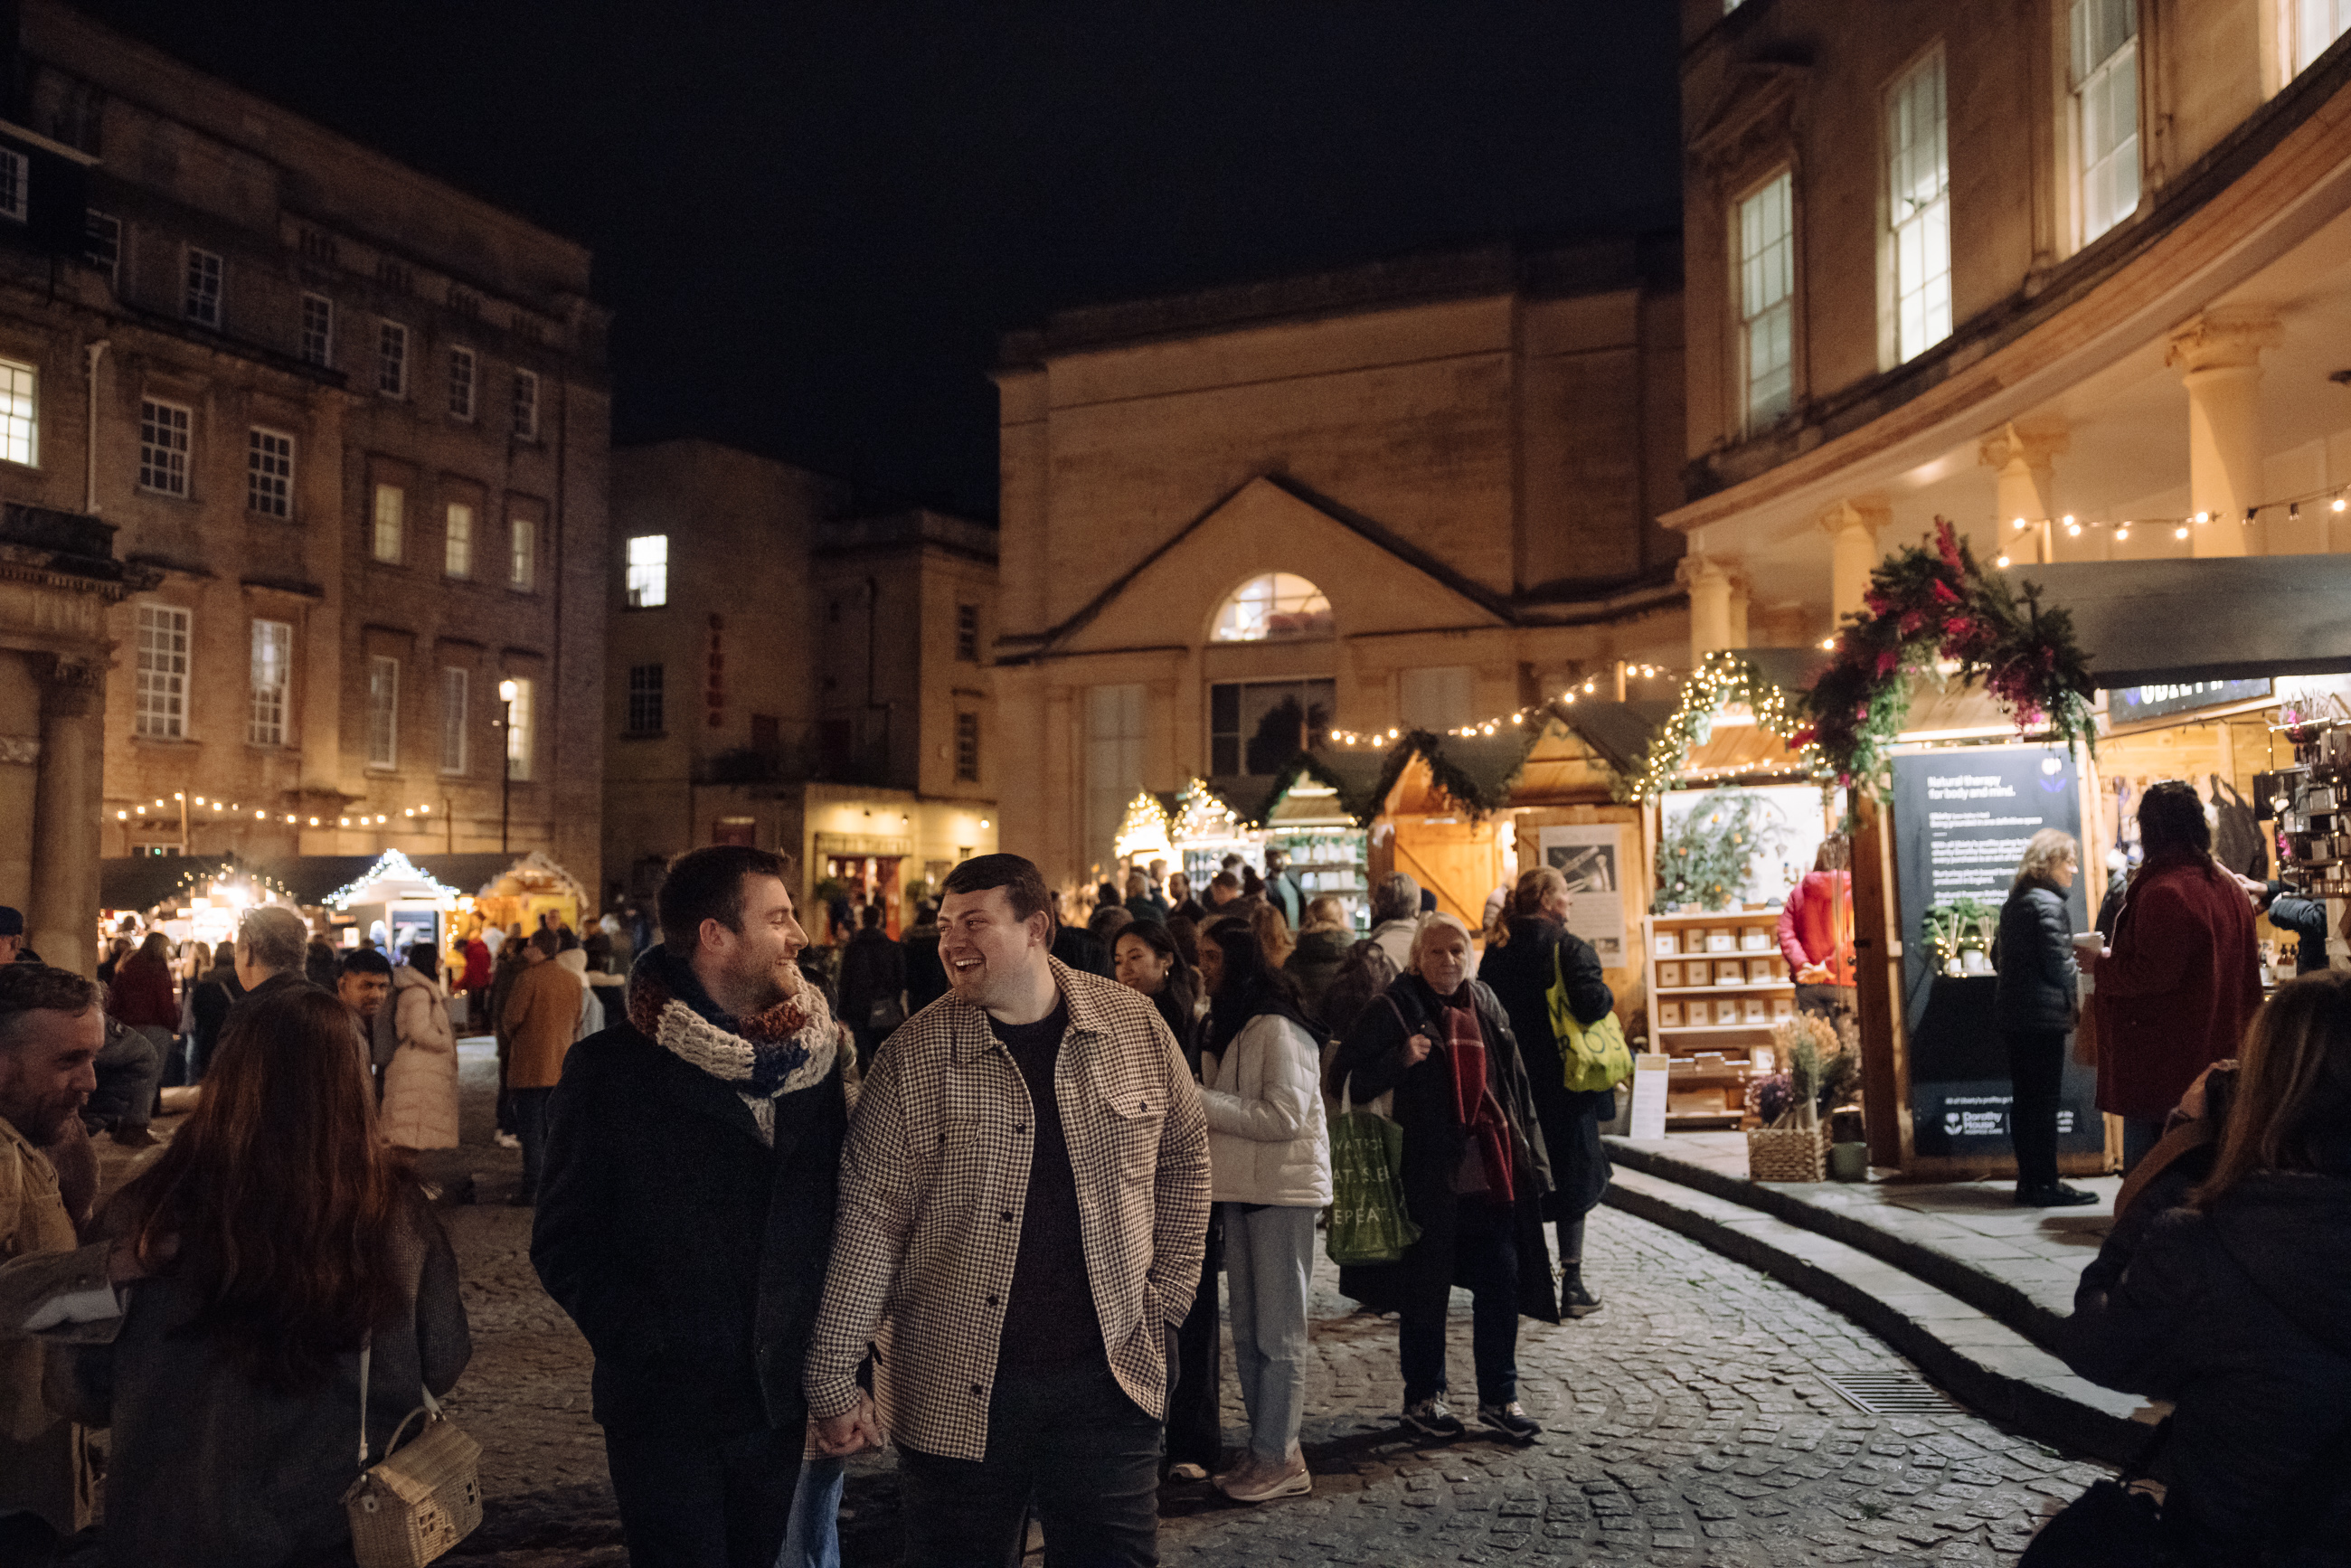 images shows a crowd among the Christmas market chalets at night